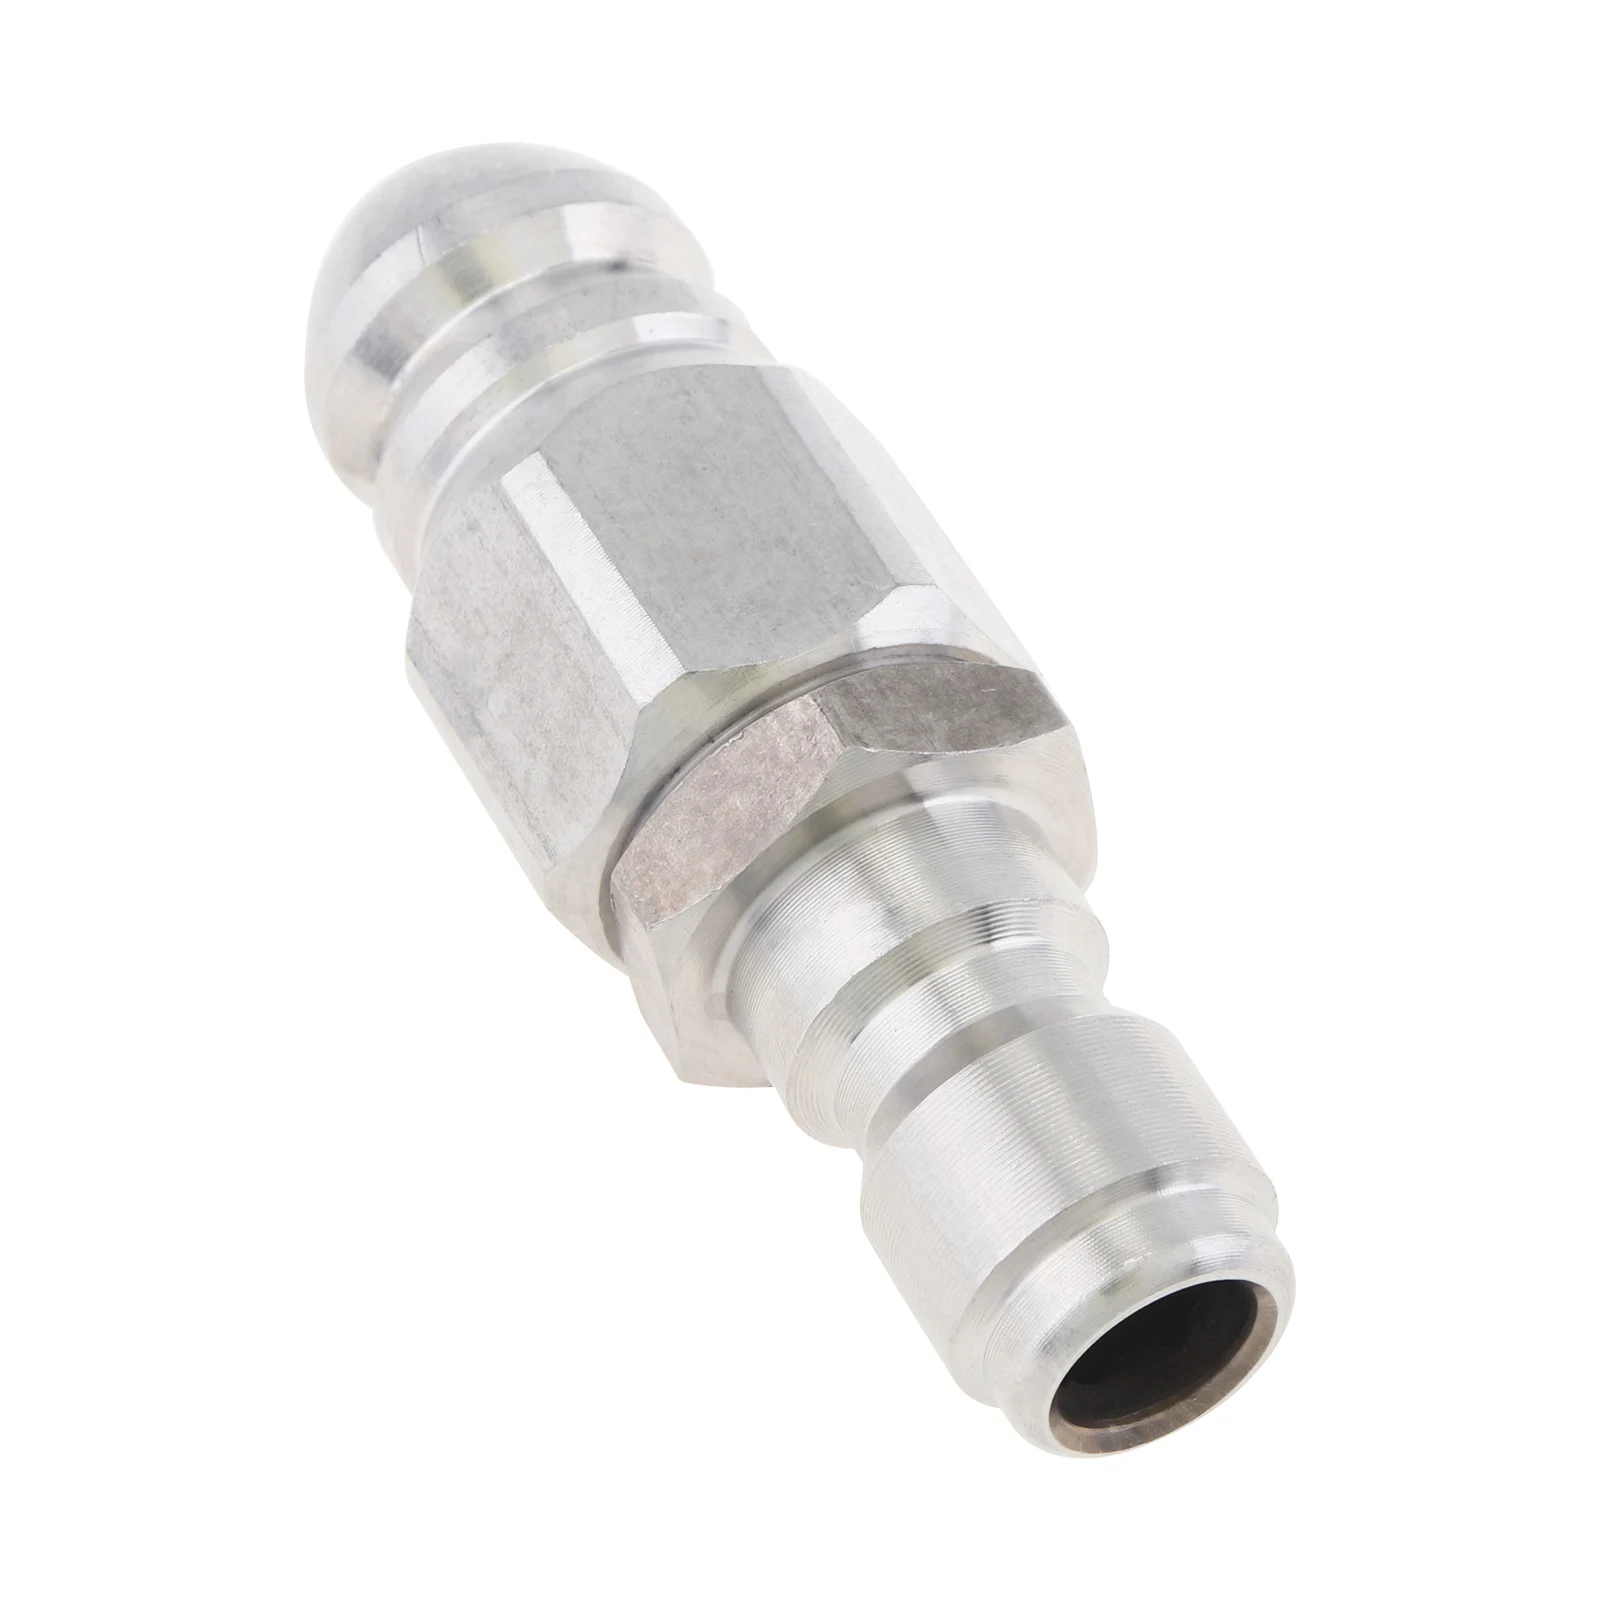 Pressure Washer Sewer Jetter Nozzle Mini Compact Quickly Connector for Drain Jetting Hose, Pressure Drain Jetter Hose Nozzle grz20 c h j l t pu hose plastic clip robot automation scissors manipulator air y type mini pneumatic gripper